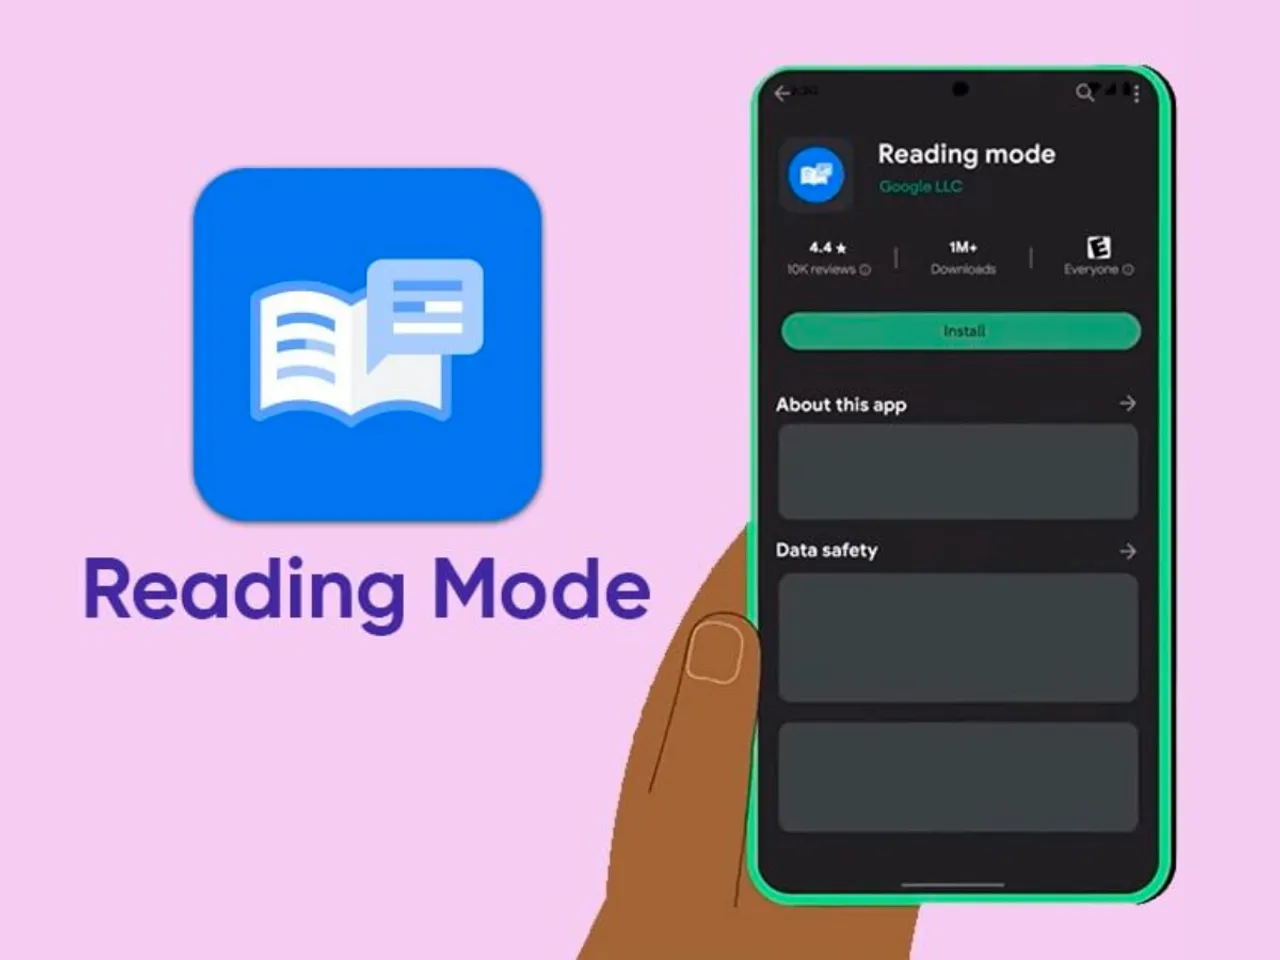 How to Use Reading Mode App on Android